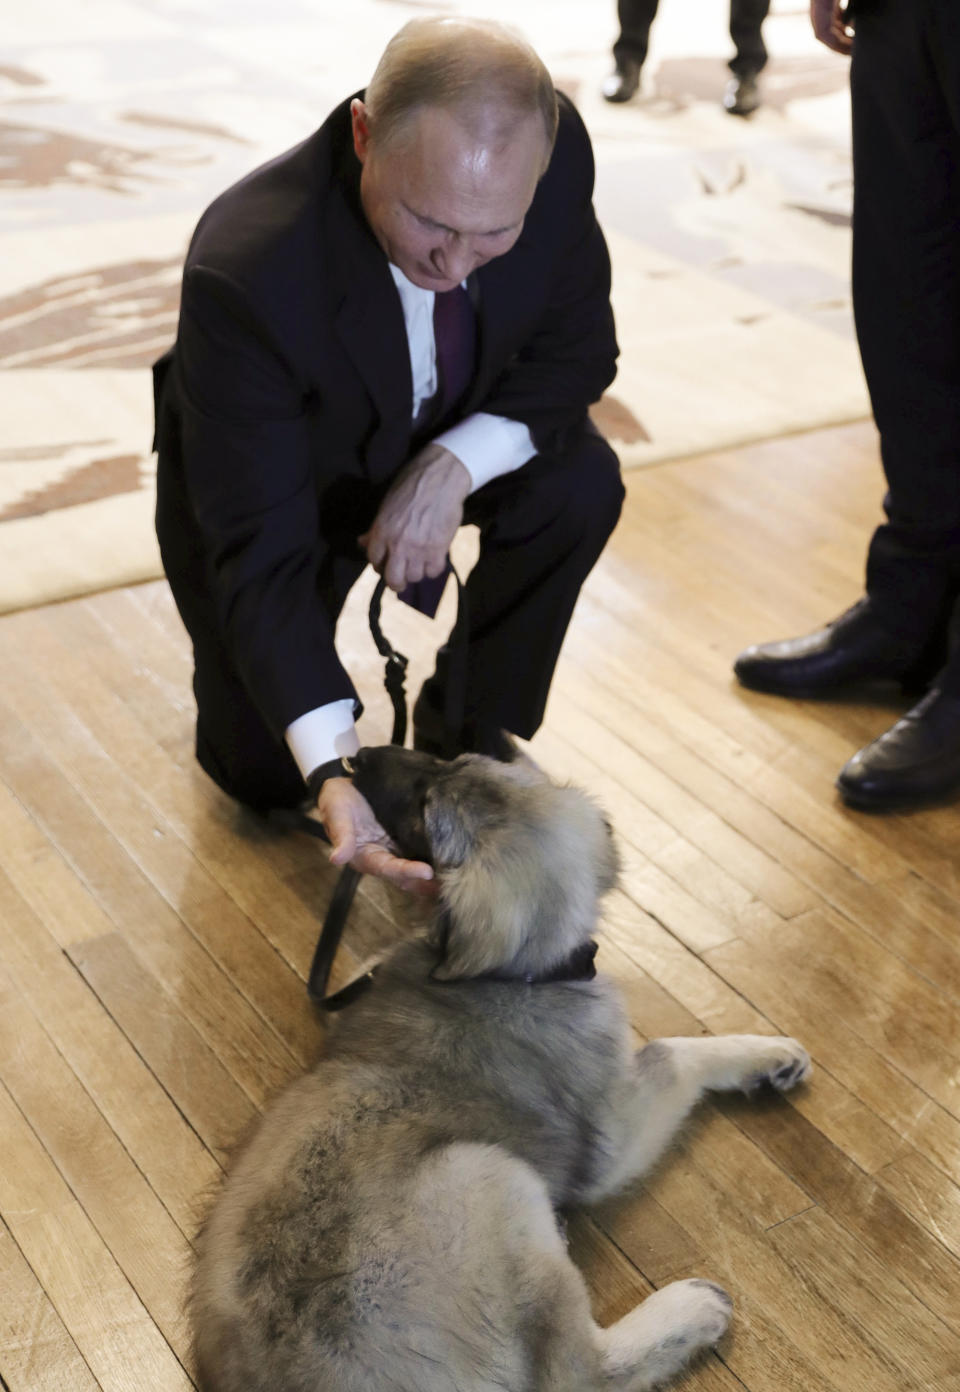 Russian President Vladimir Putin pets a puppy of the Sarplaninac breed presented to him by Serbian President Aleksandar Vucic during their meeting in Belgrade, Serbia, Thursday, Jan. 17, 2019. Putin arrives in Serbia on Thursday for his fourth visit to the Balkan country since 2001. (Mikhail Klimentyev, Sputnik, Kremlin Pool Photo via AP)